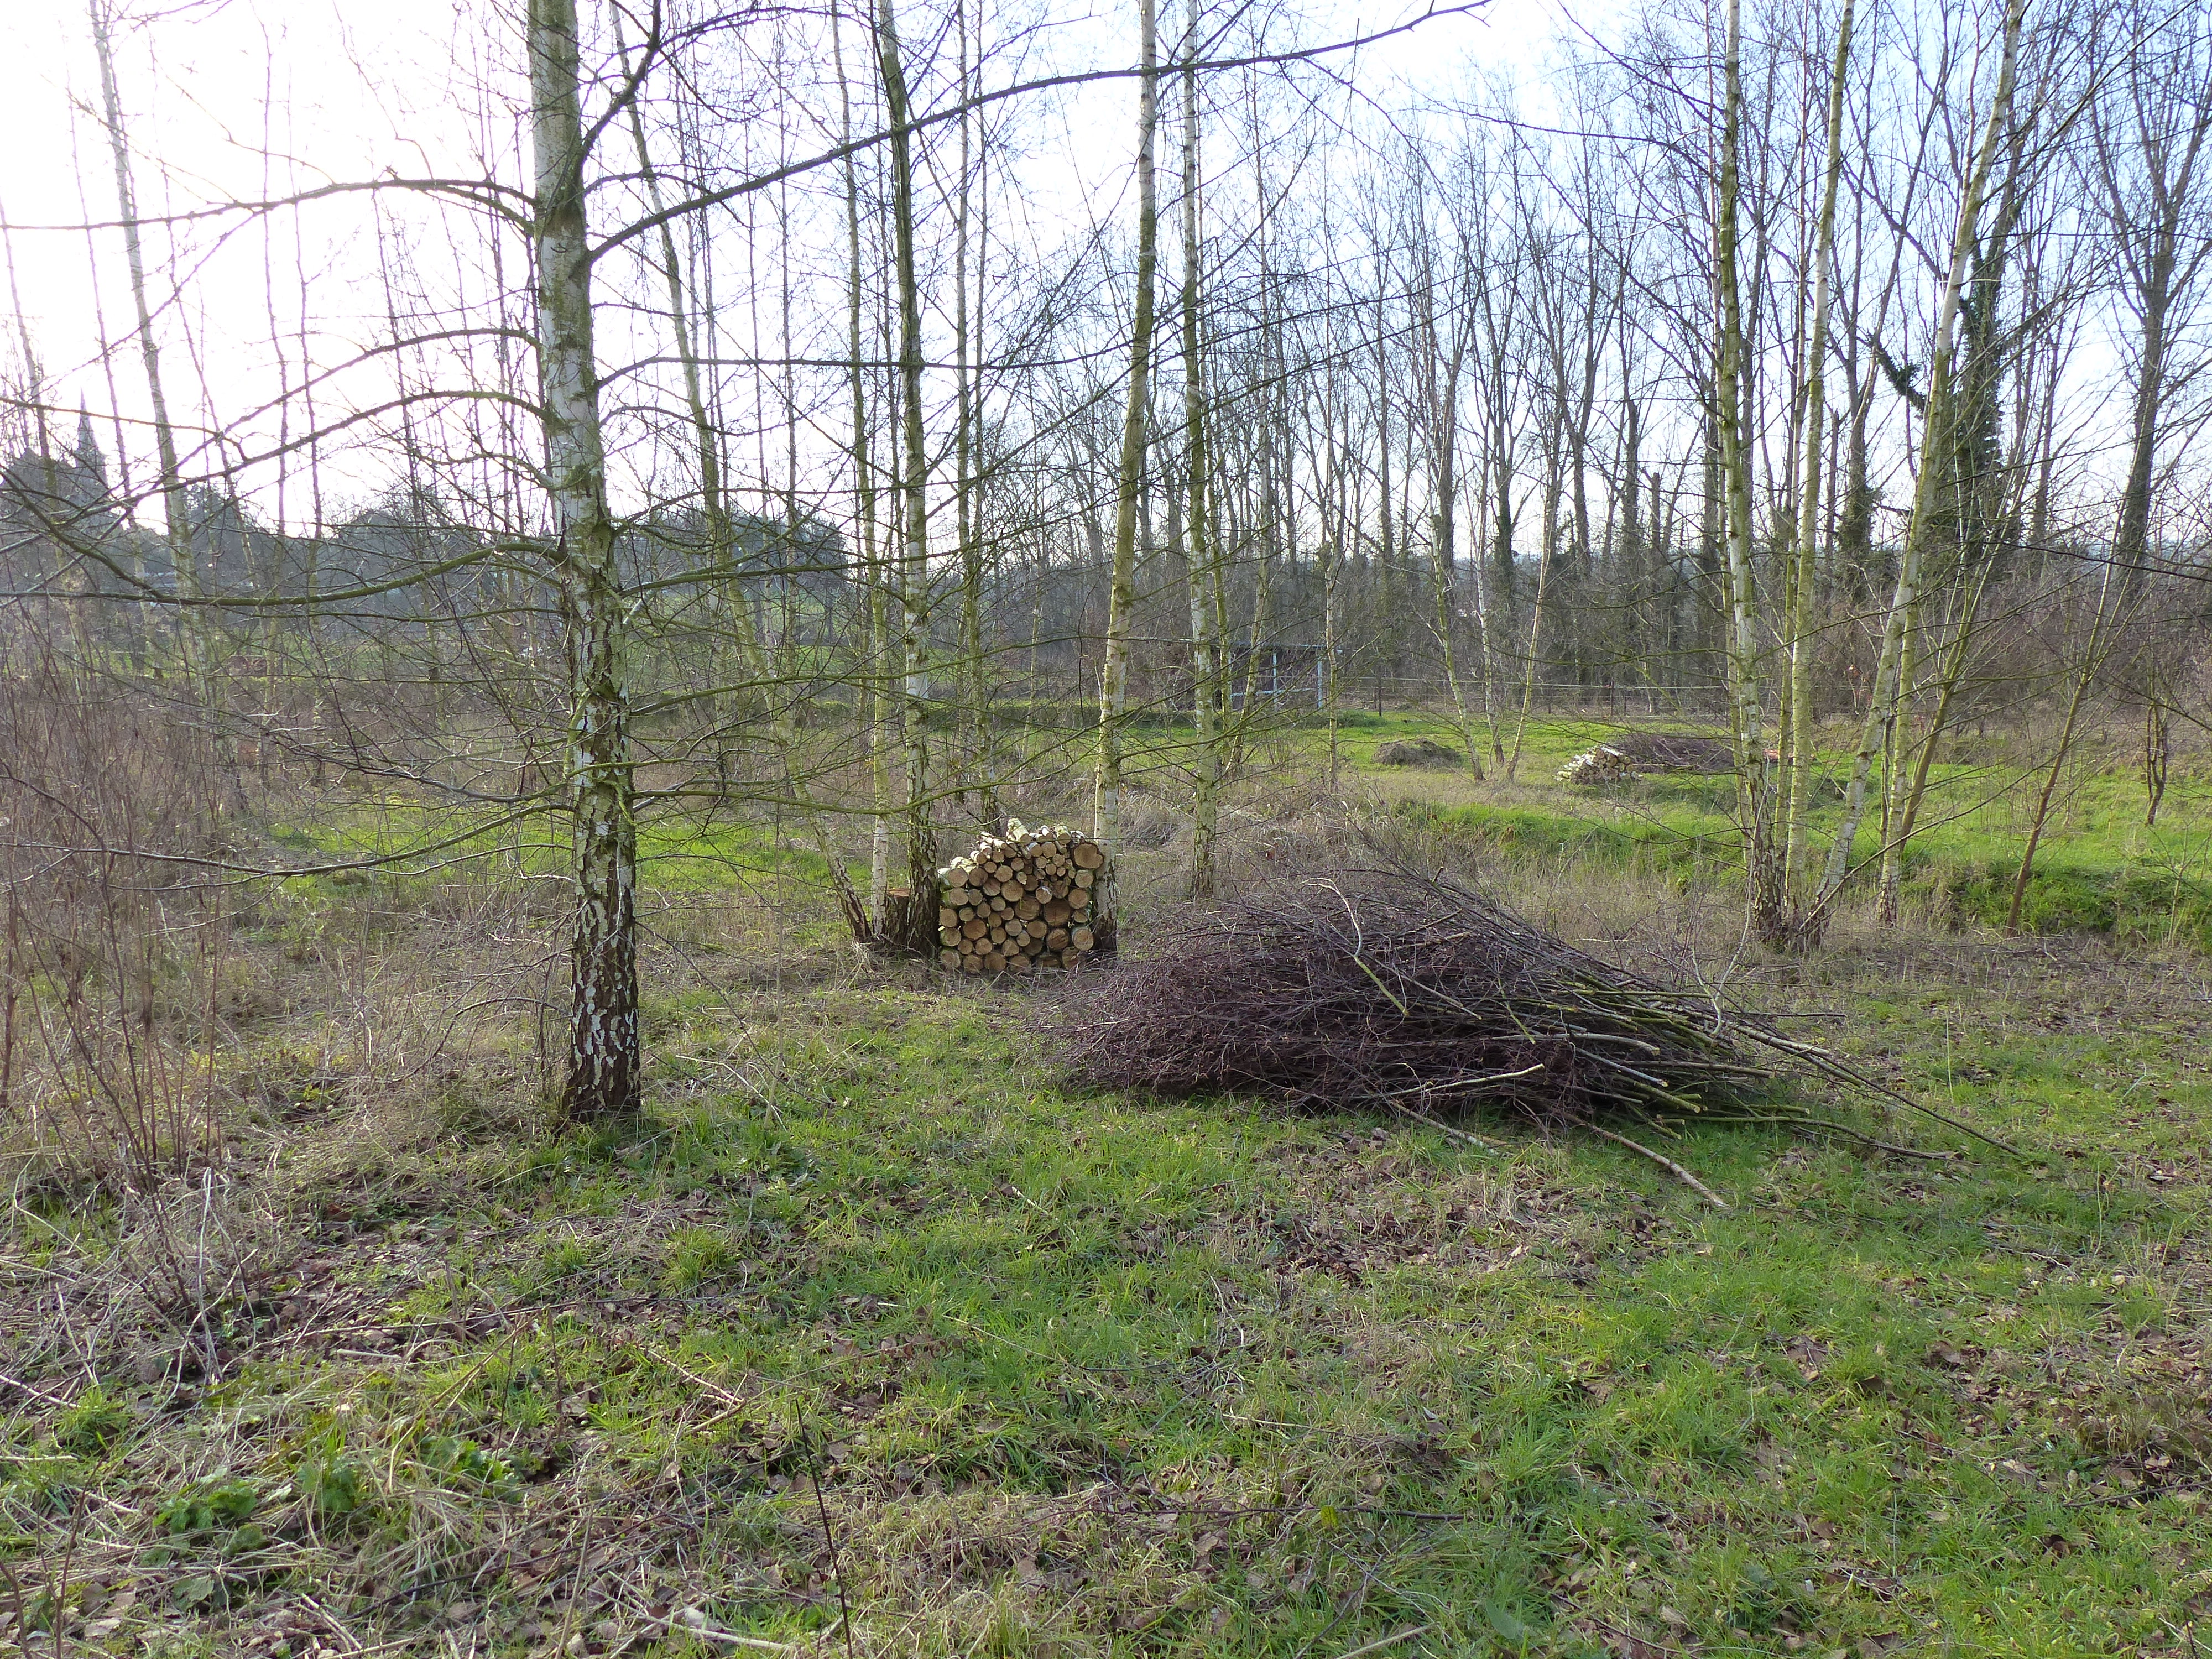 Winter woodland showing piled logs and brush.